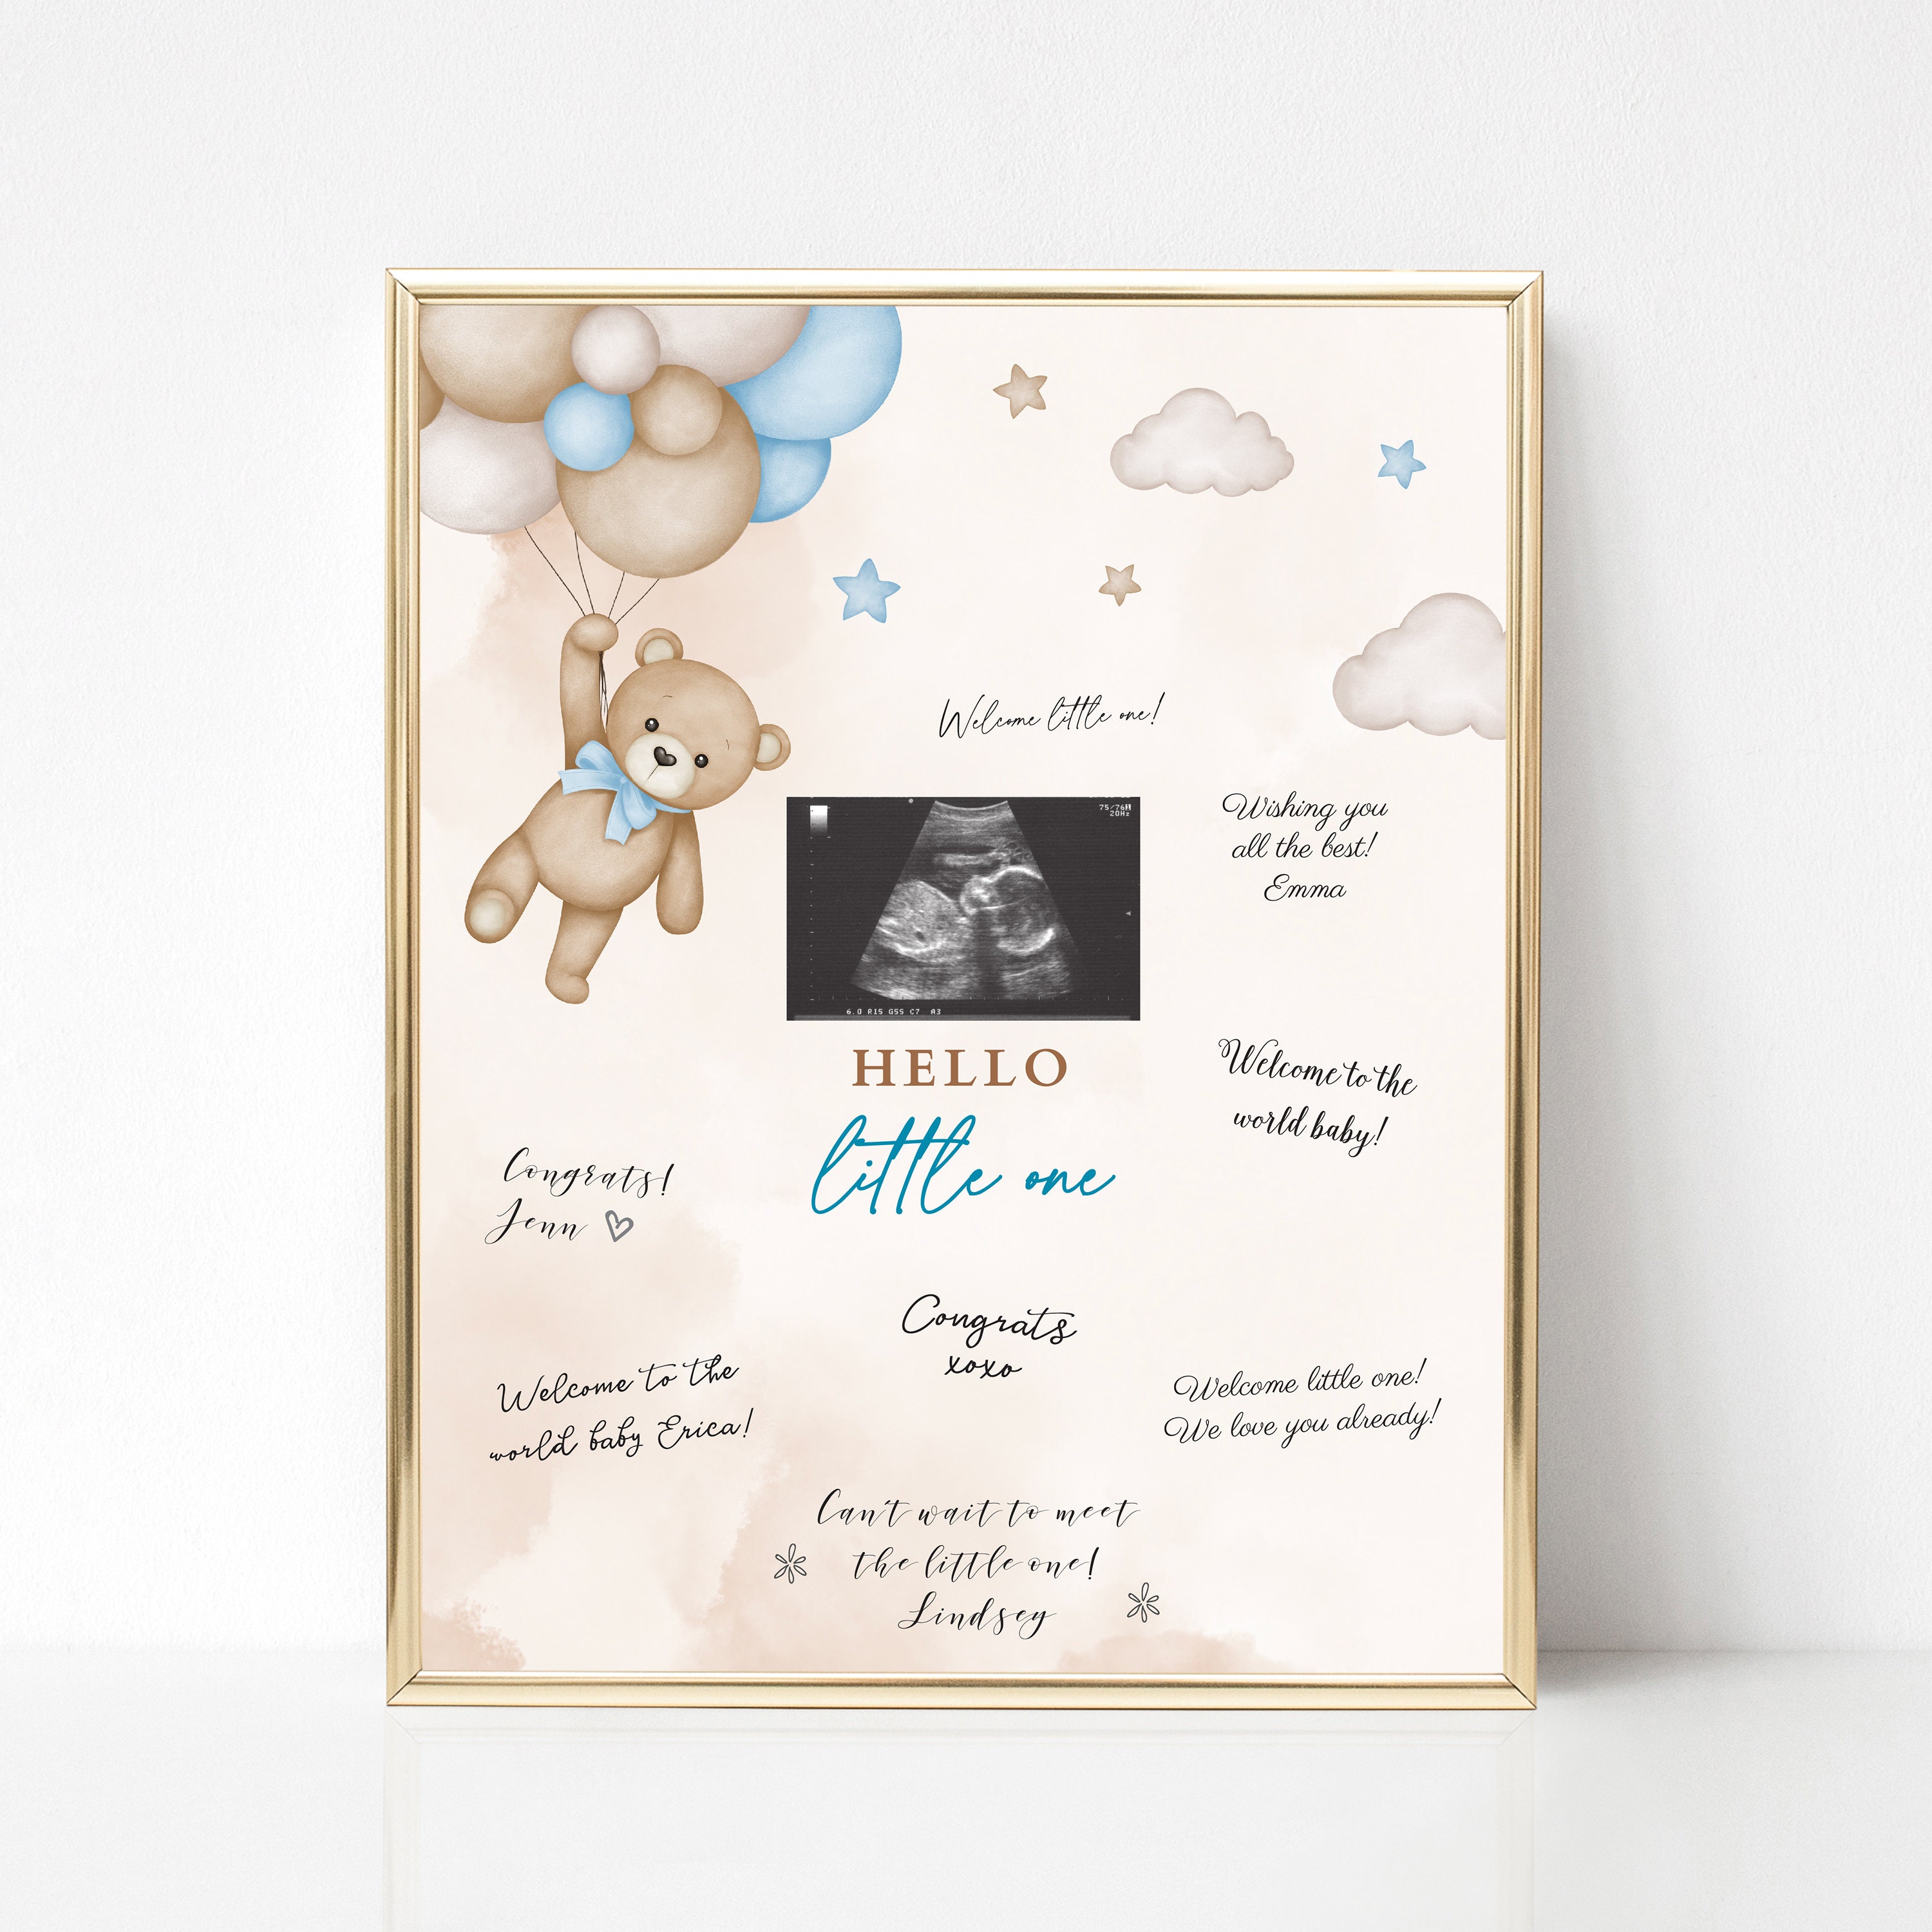 Cute Ways to Use Ultrasound Pictures - Peppy Prints